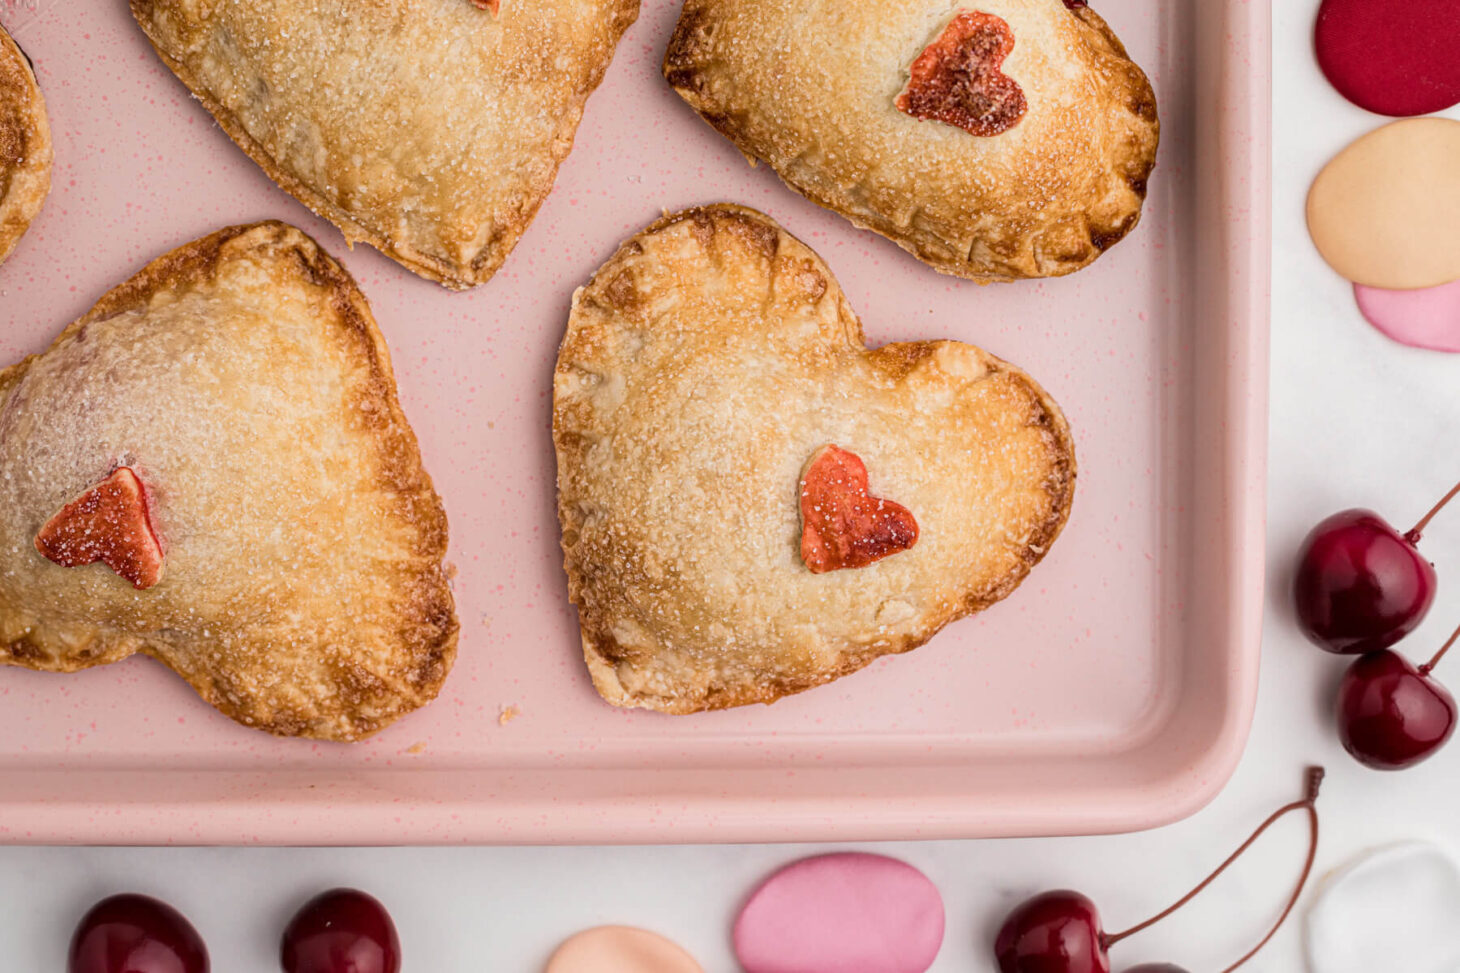 A pink baking sheet full of golden baked heart shaped individual cherry hand pies decorated with red pastry hearts.